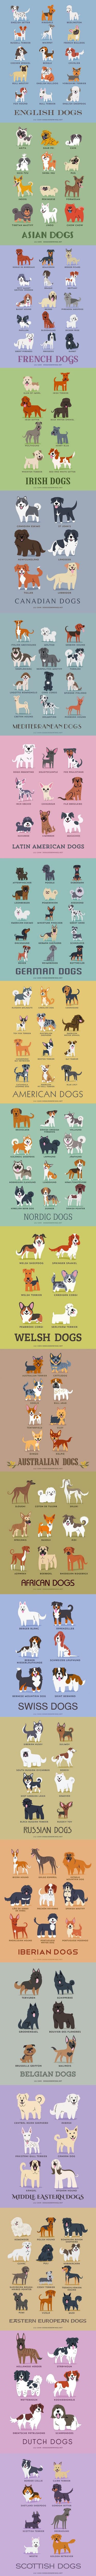 Cool list of various dog breeds from all over the world. Cool if you want to know where your favorite breed originated. :)